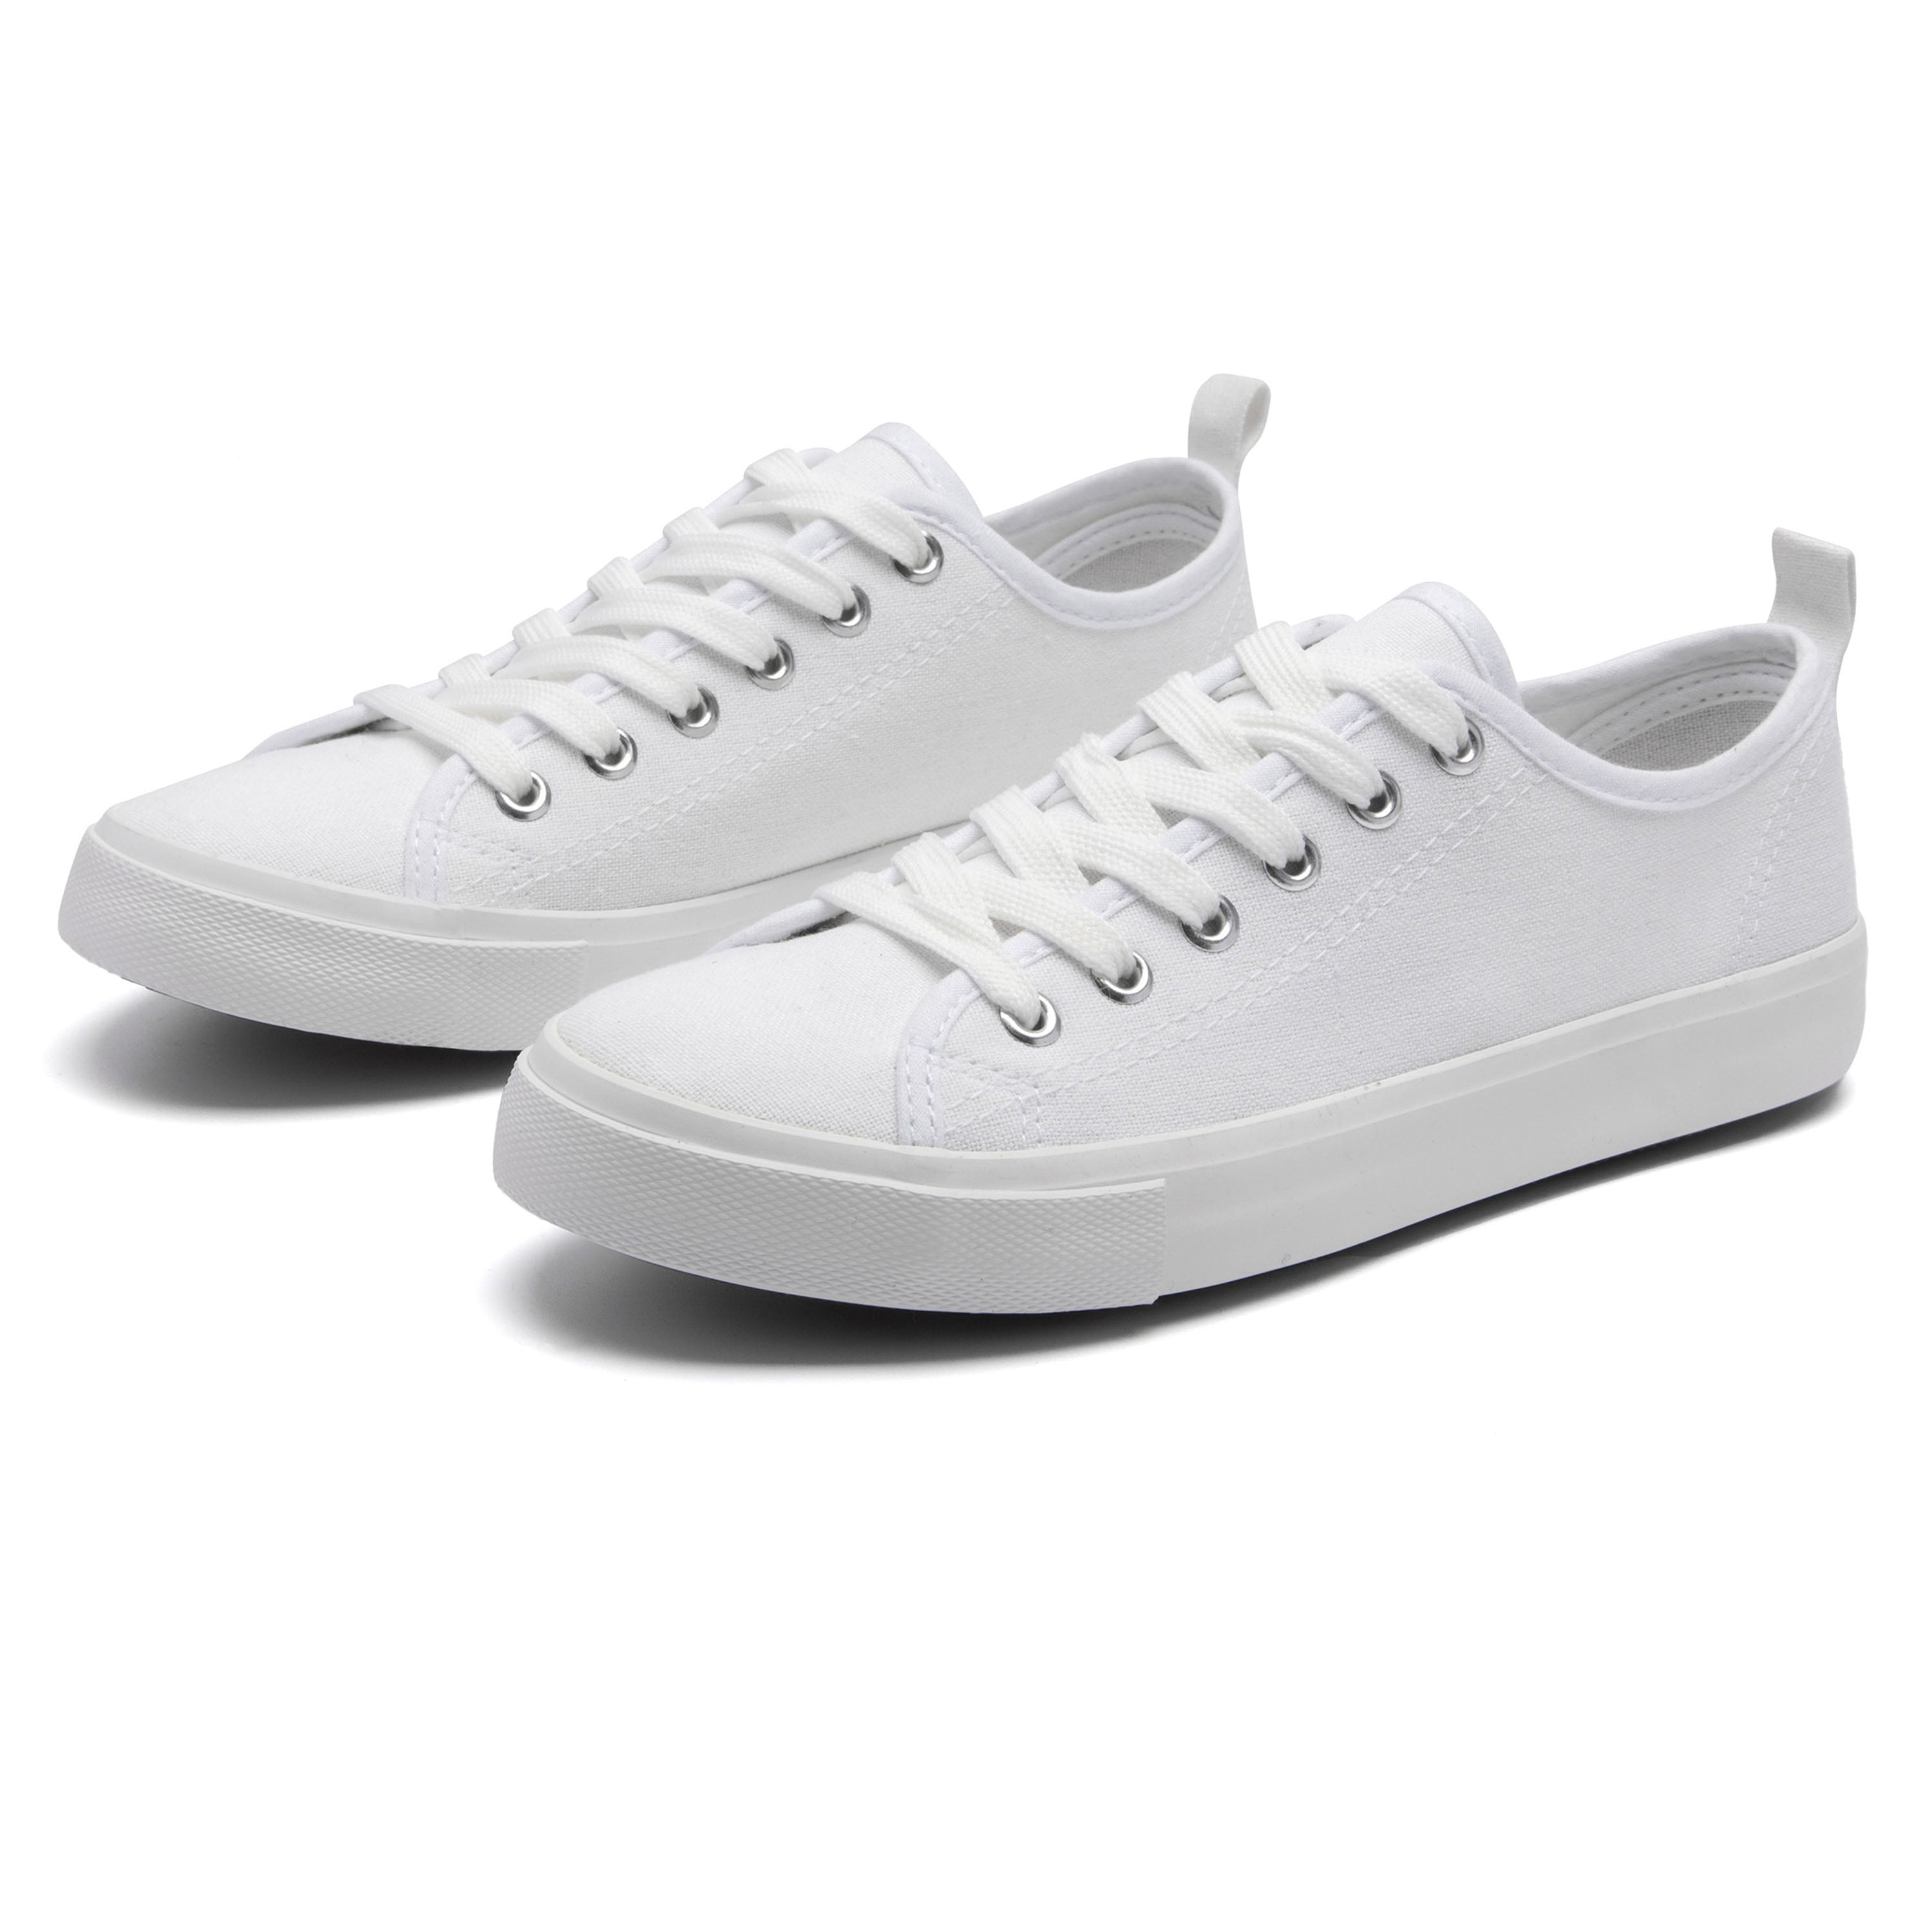 The Fashion Supply Skylar Canvas Women's Sneakers - Canvas Shoes for ...